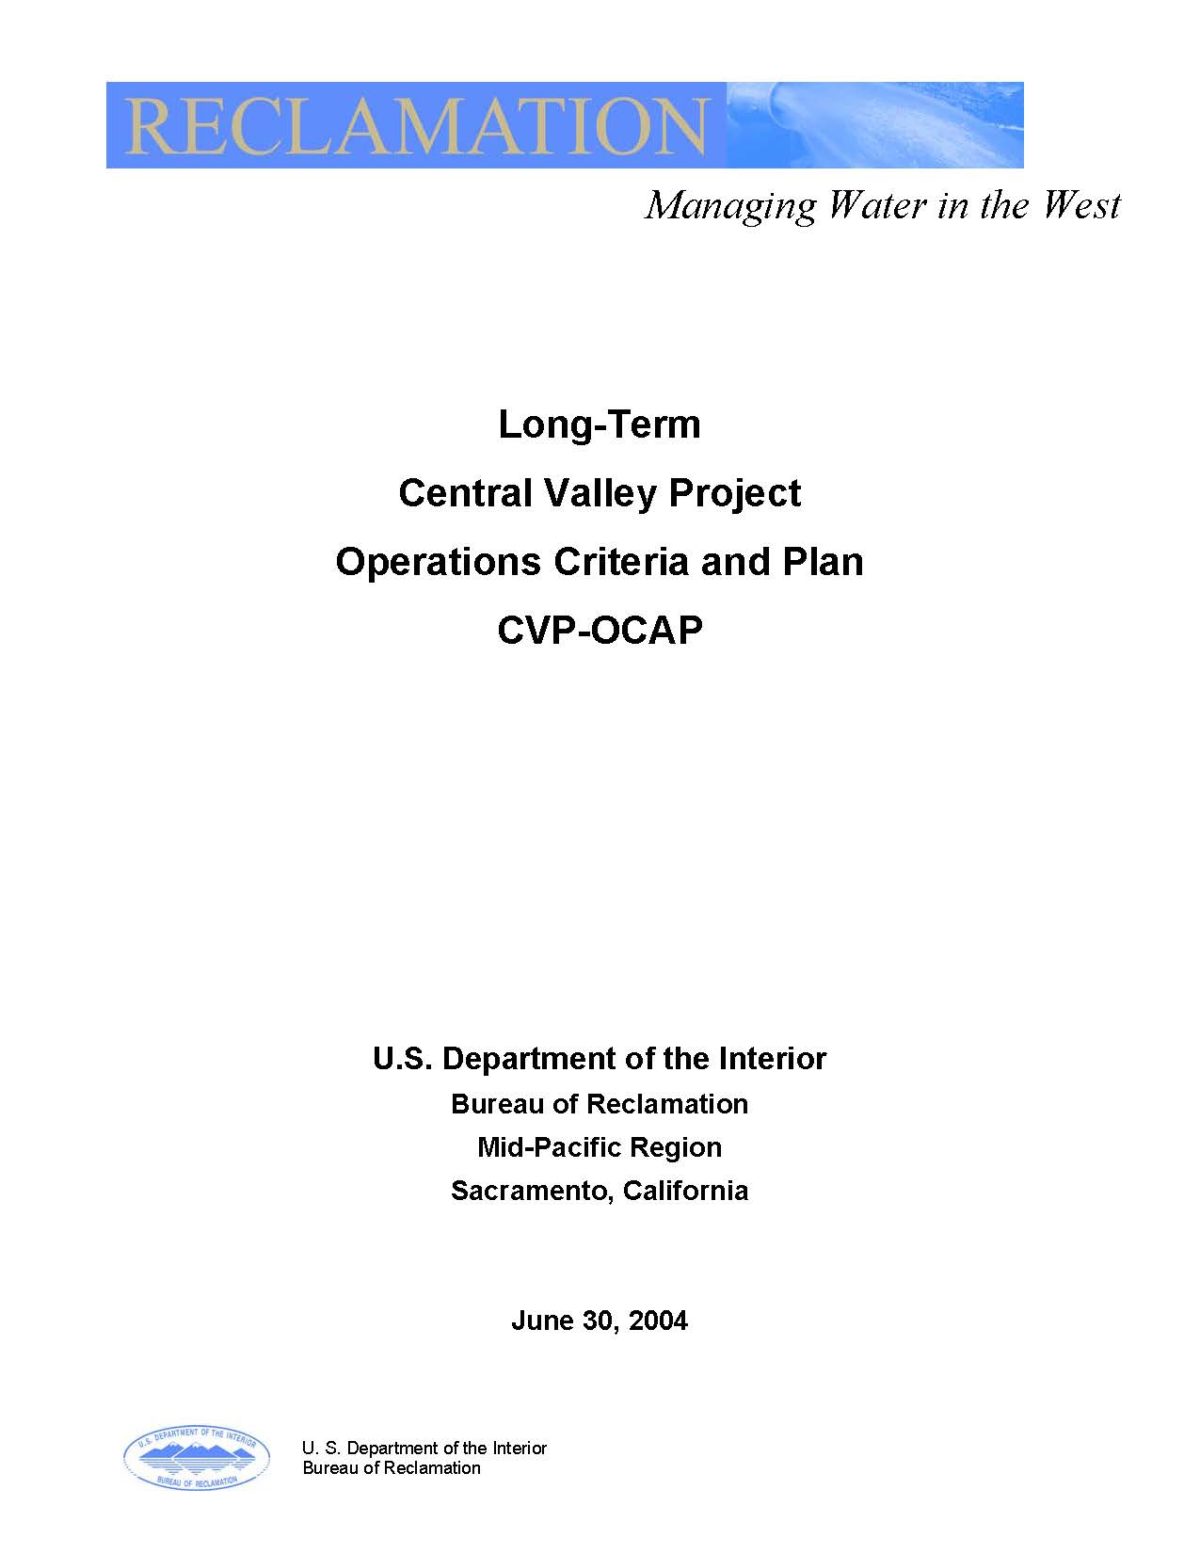 Long-Term Central Valley Project Operations Criteria and Plan CVP-OCAP